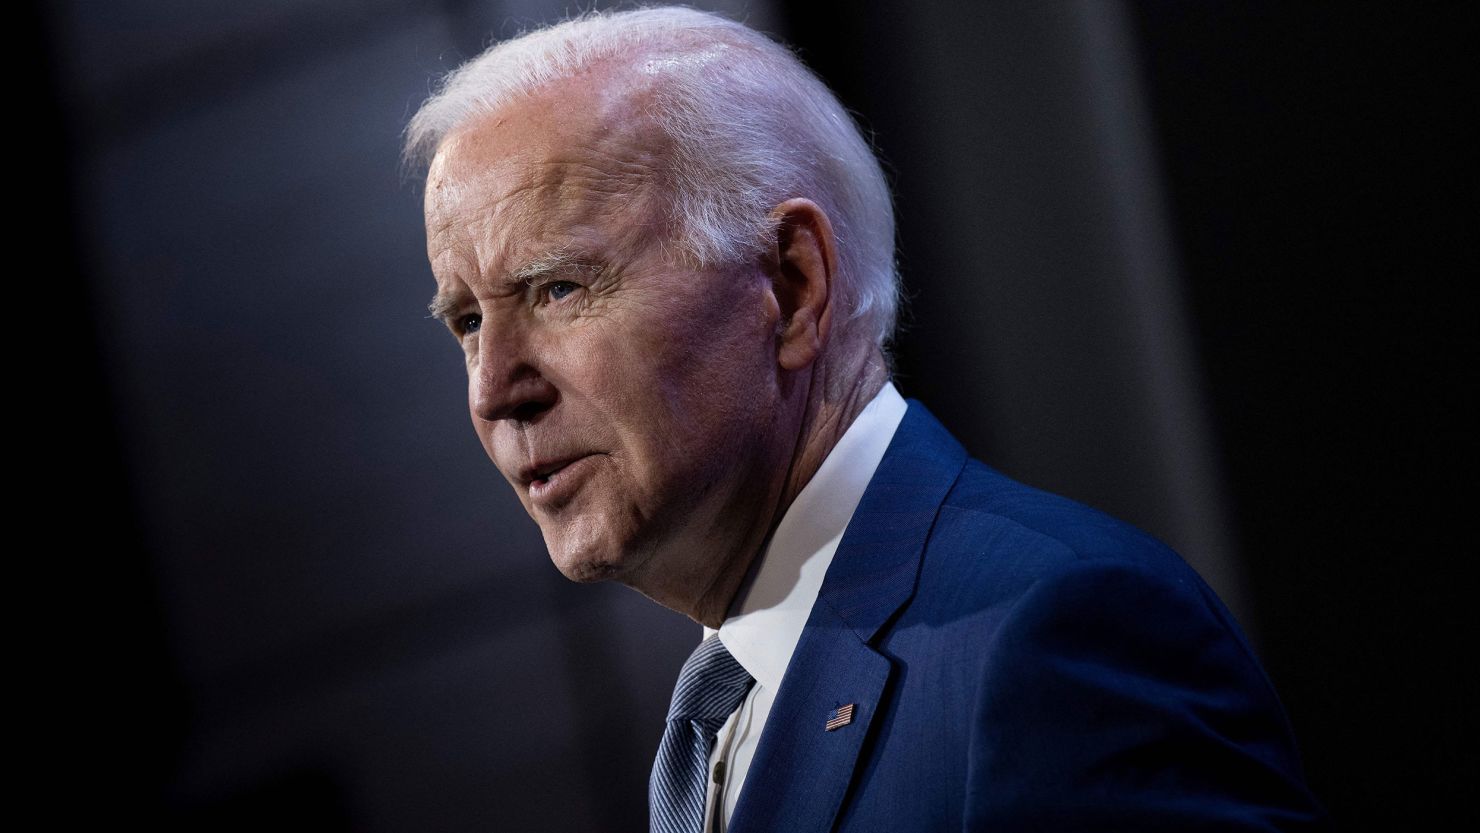 Biden’s immigration policy failures lead to frustration and finger